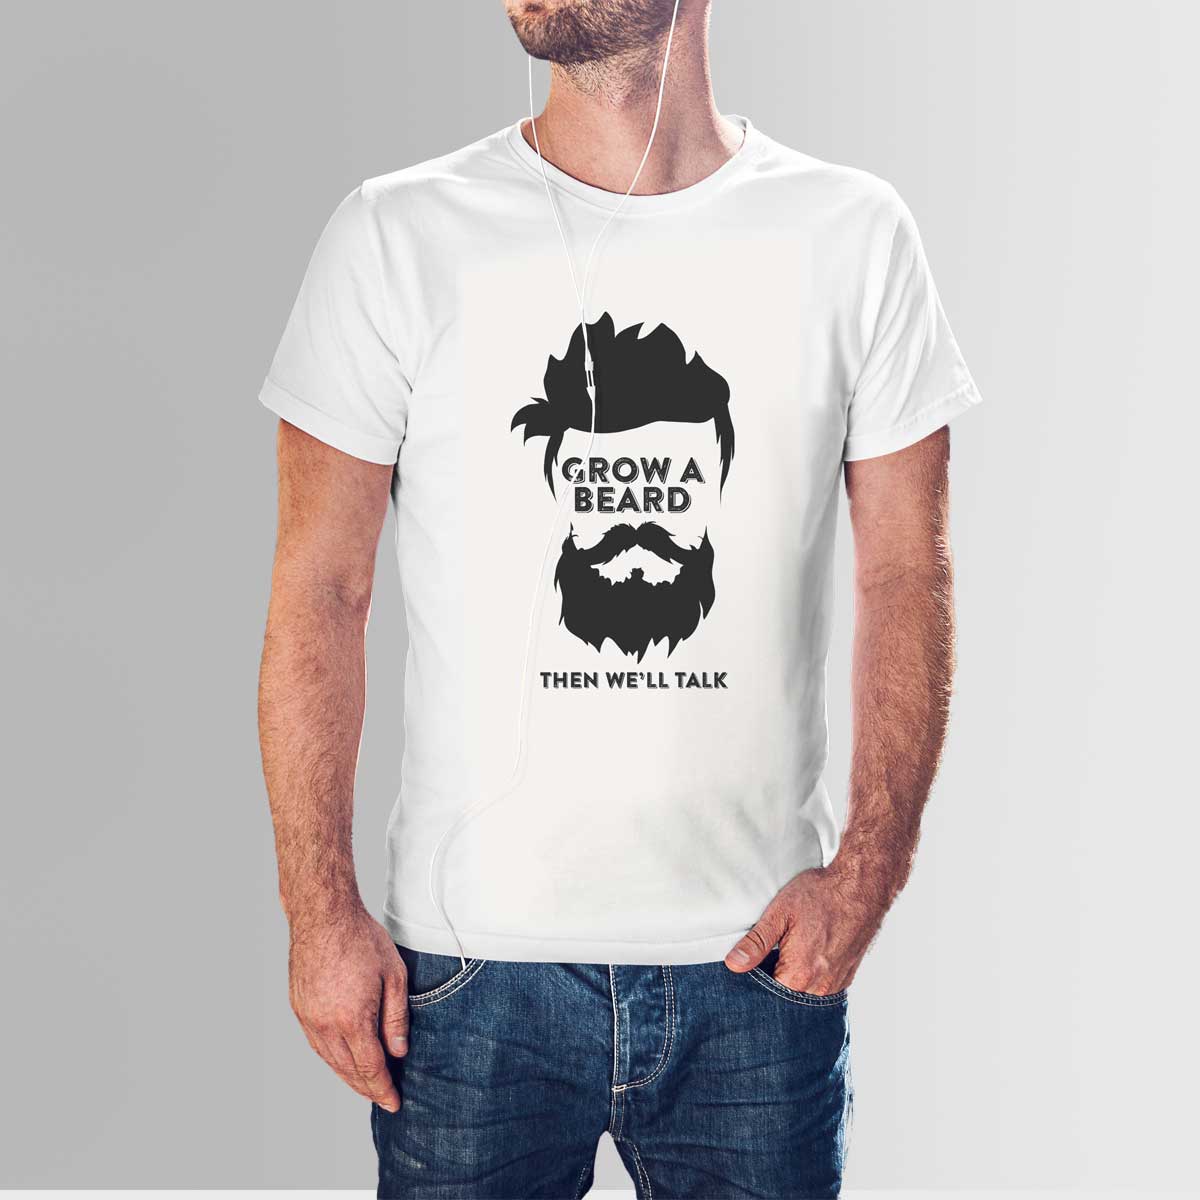 Beard T-shirt, High Quality Cotton with Crew Neck - Design Your Own ...